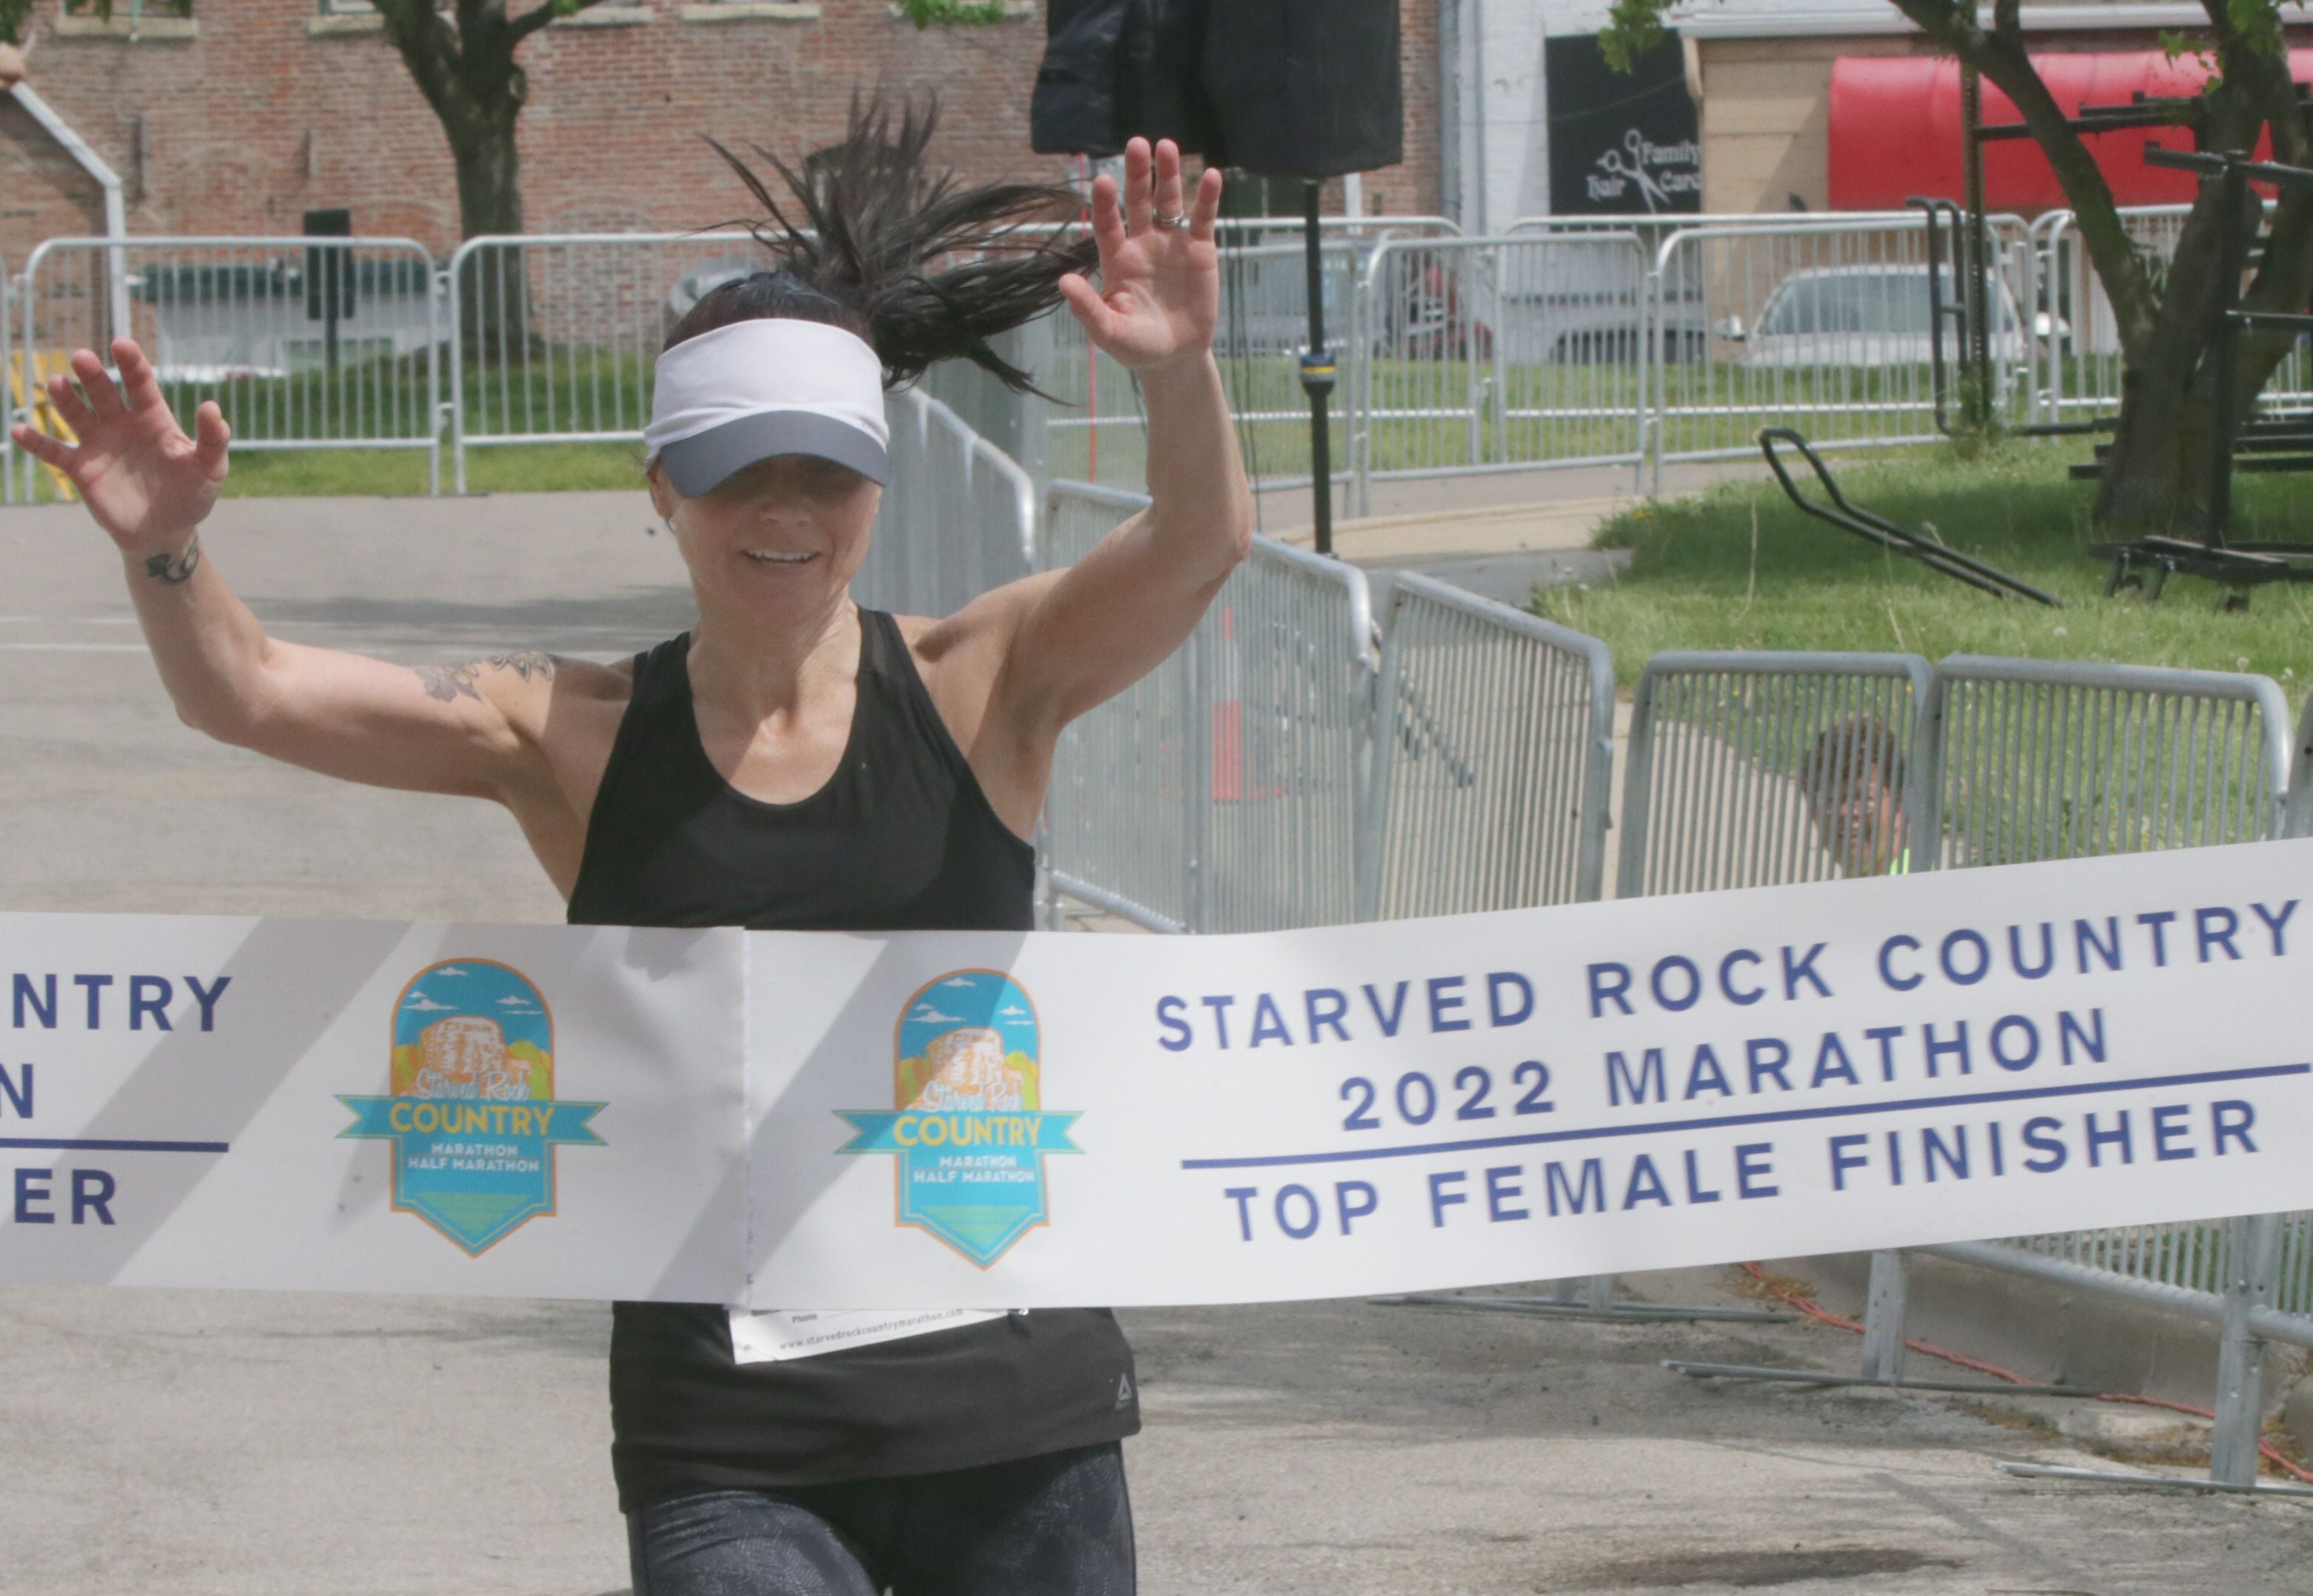 Angie Lampi of Dexter, Mich., is the top female finisher as she crosses the finish line during the Starved Rock Marathon on Saturday, May 14, 2022, in Ottawa.